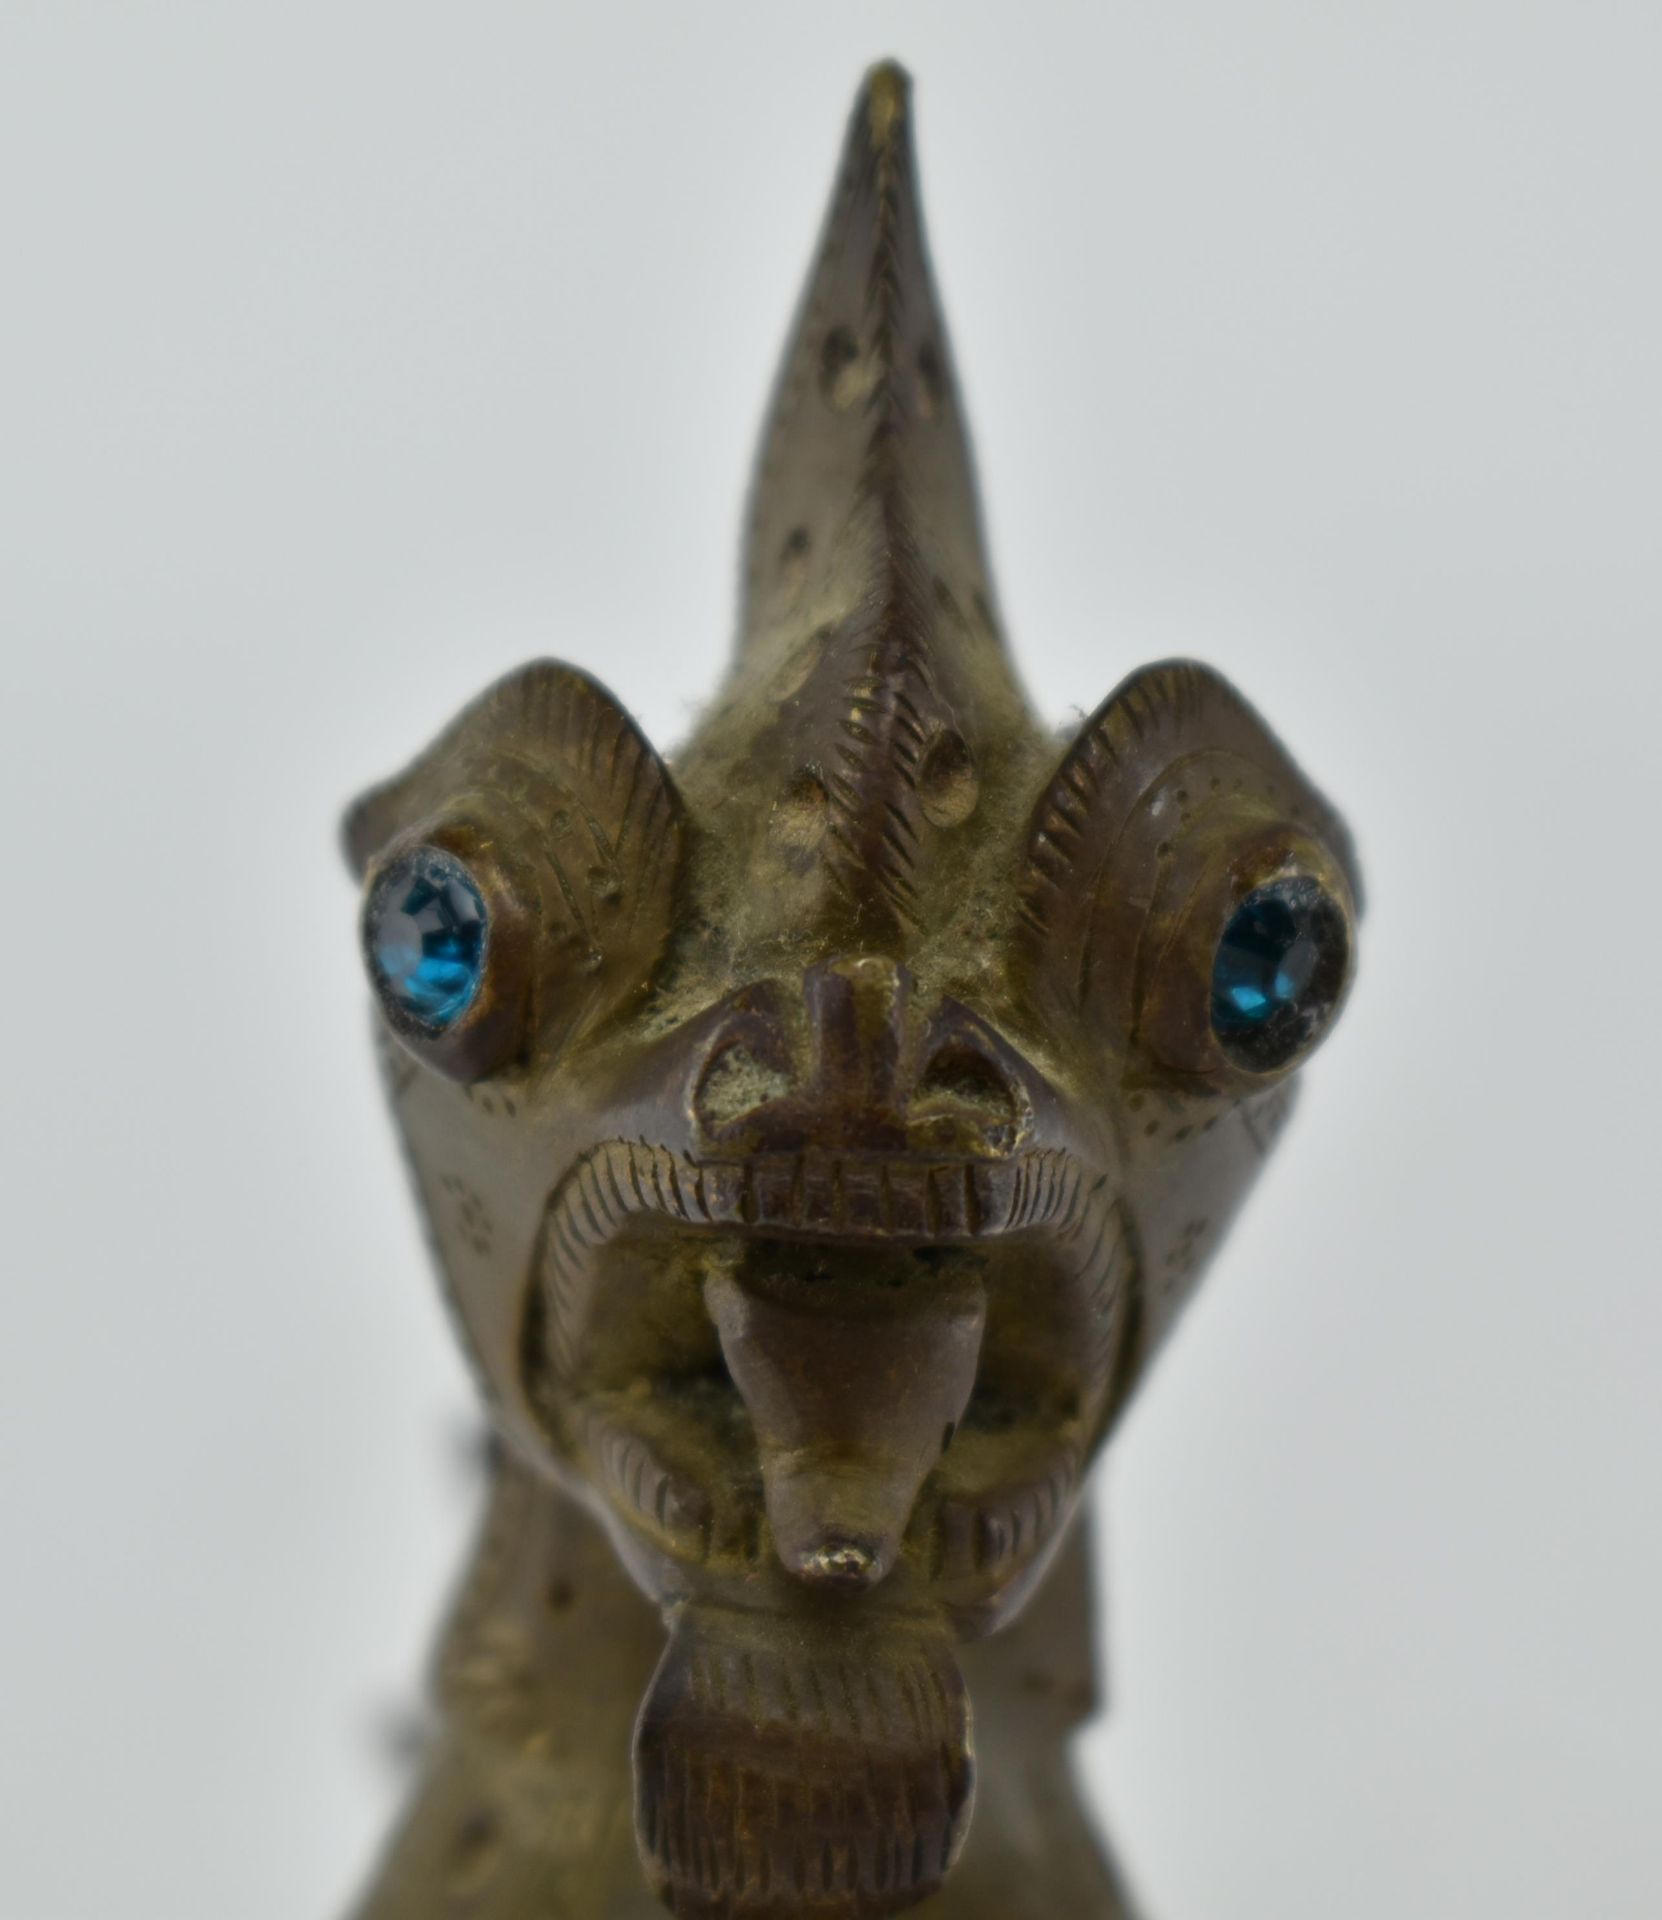 19TH CENTURY BURMESE SOLID BRASS DRAGON/CHINTHE FIGURINE - Image 6 of 6